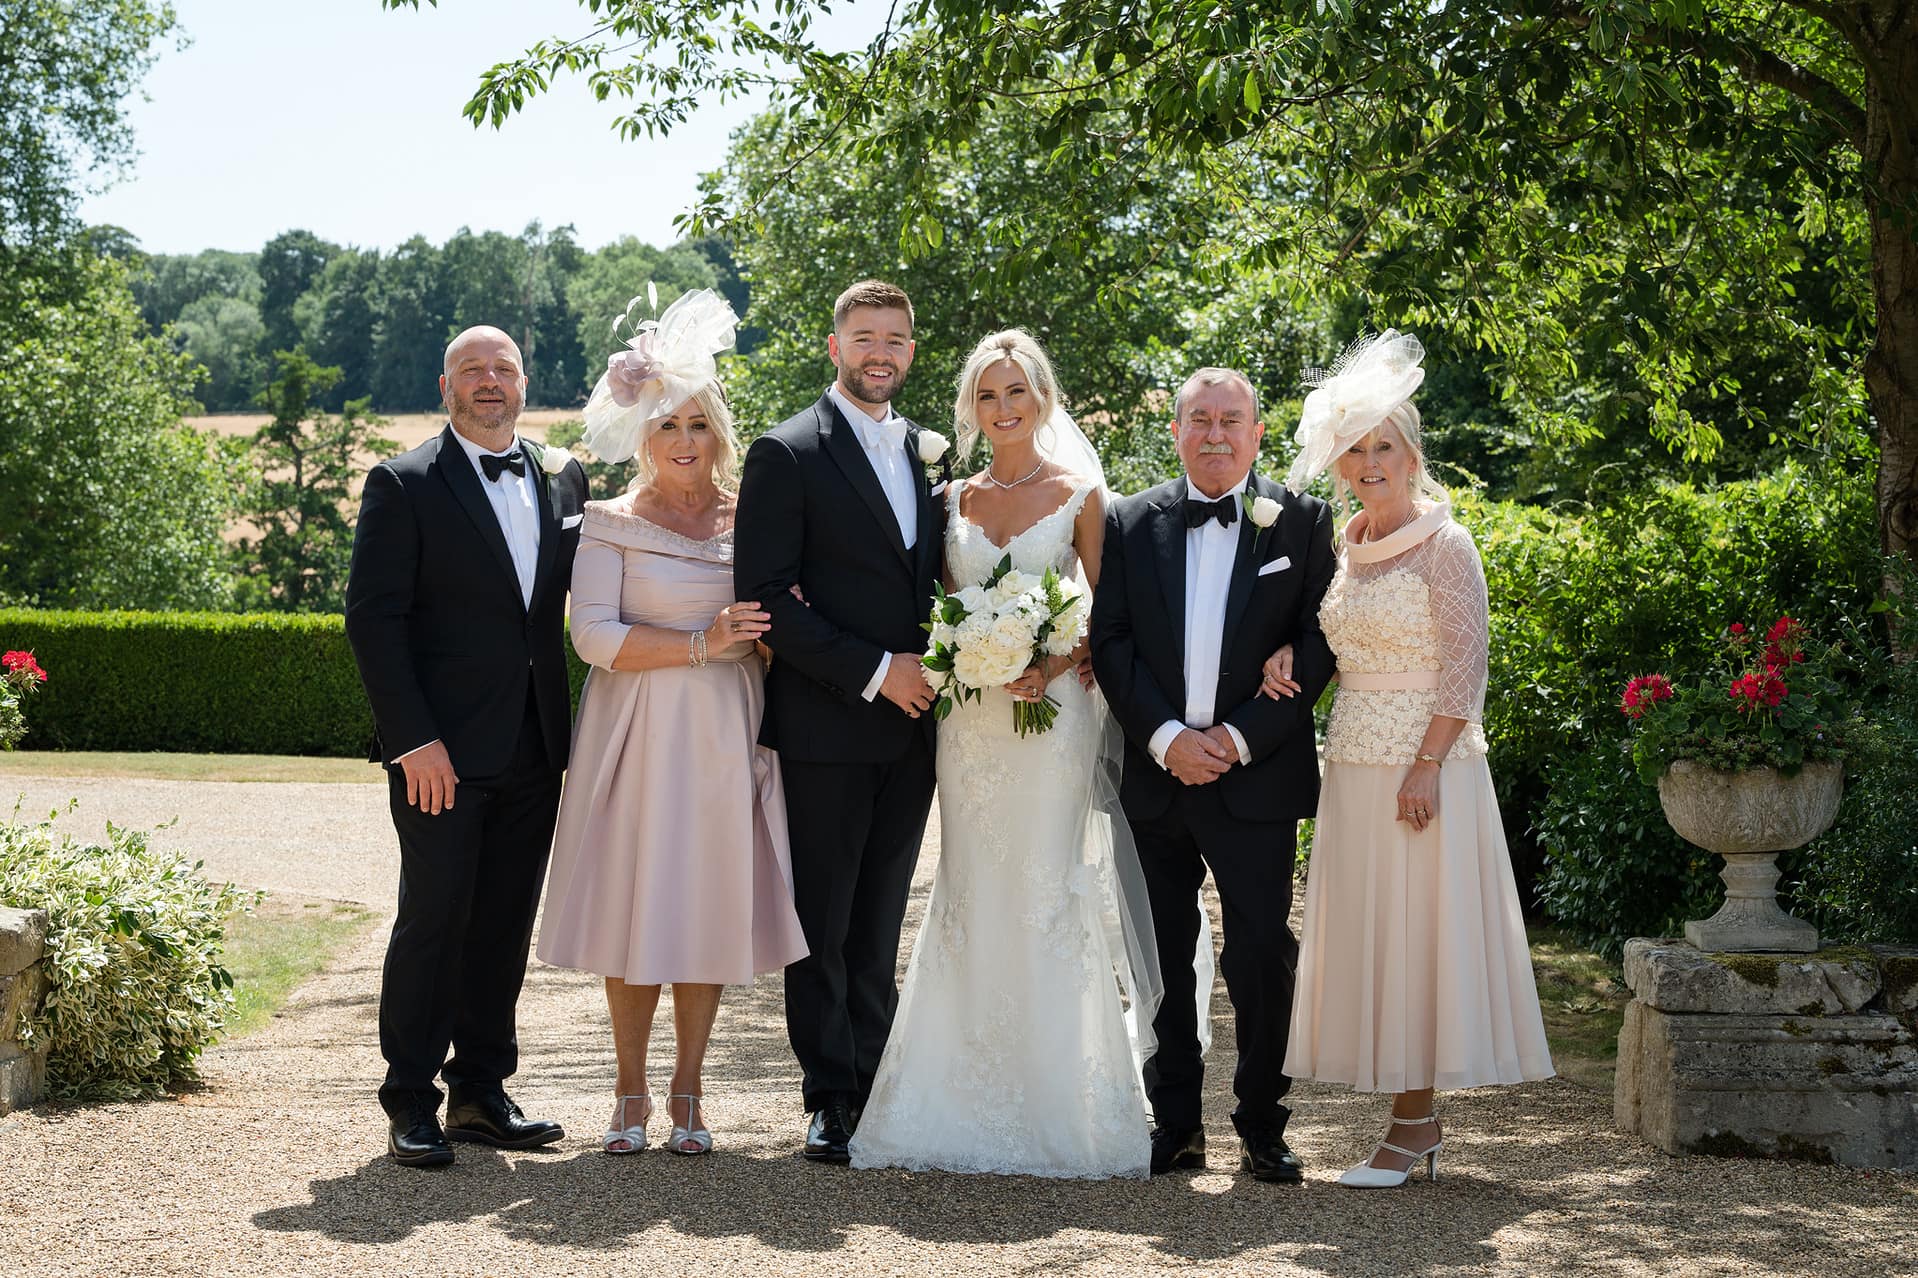 Group photo of bride and groom with their parents